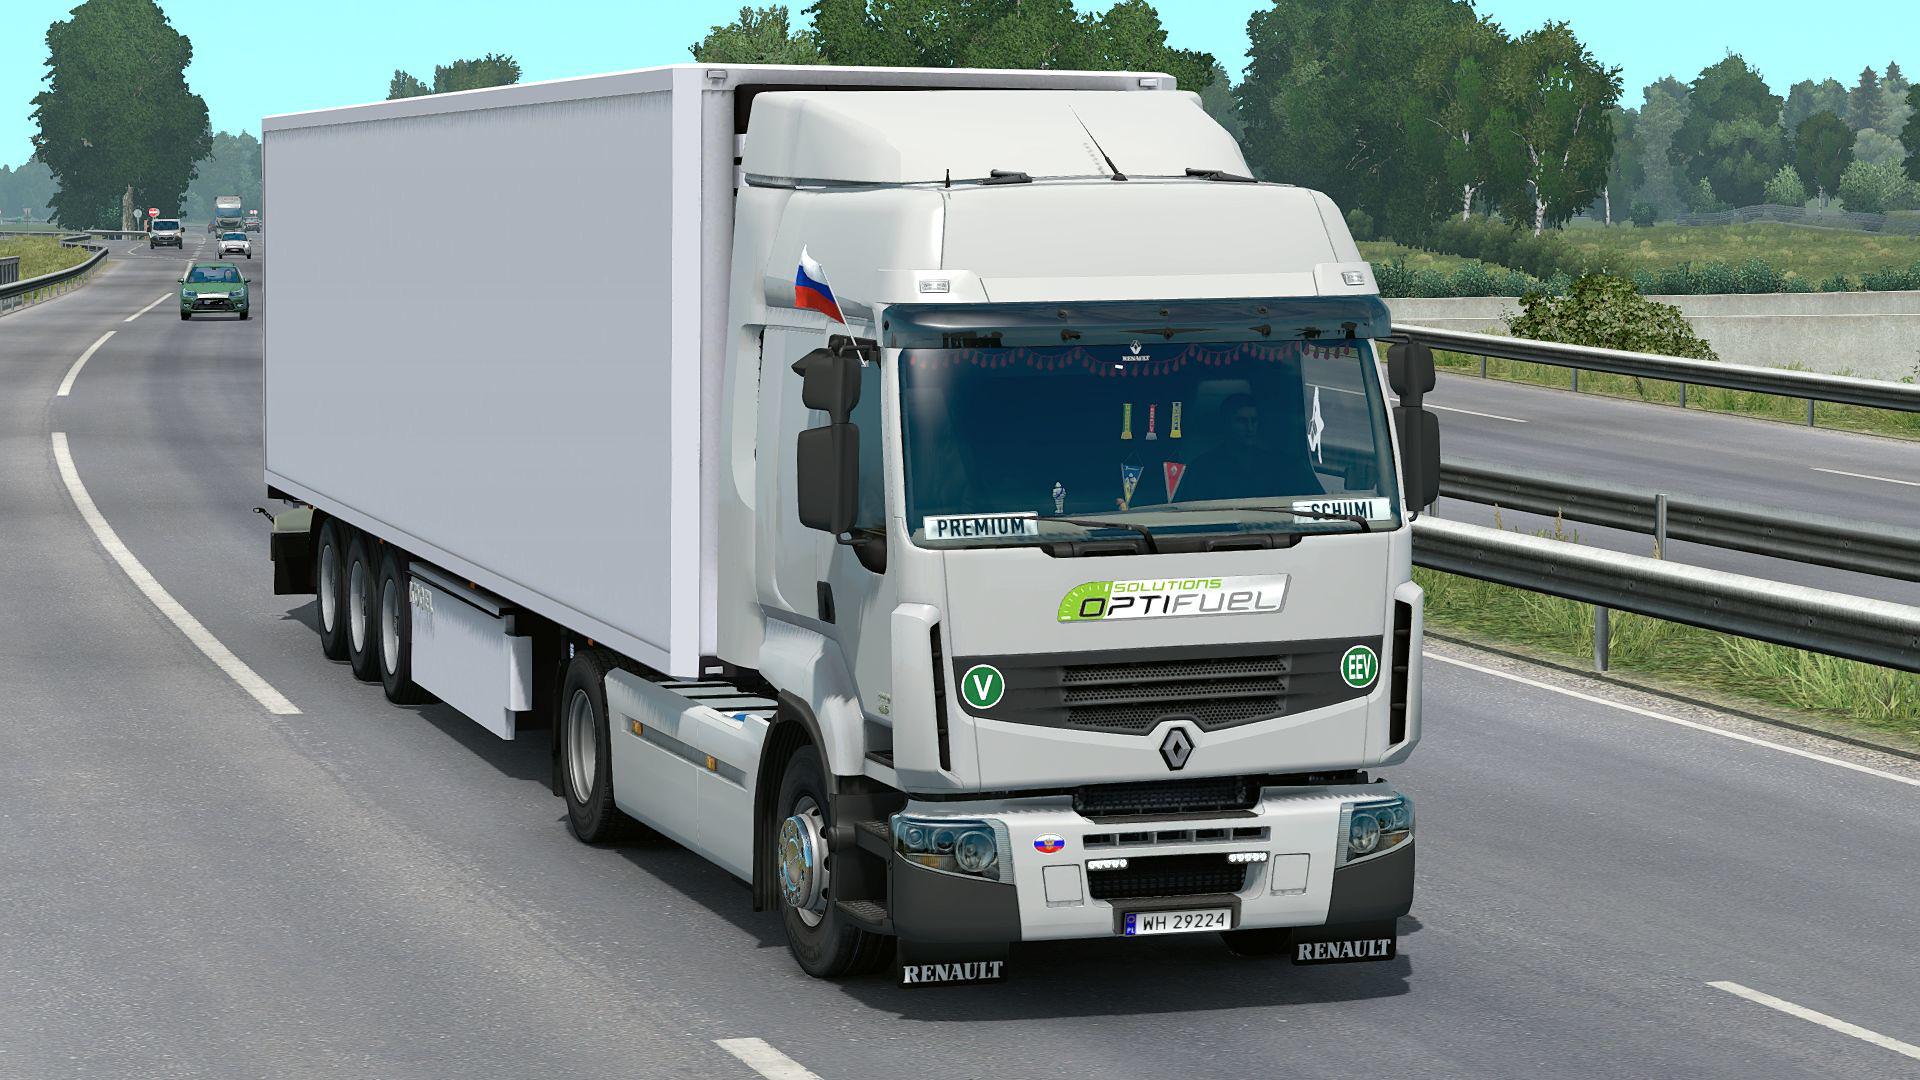 Attend pivot Exclamation point ETS2 - Renault Premium Truck V4.9 (1.38.x) | Euro Truck Simulator 2 | Mods .club